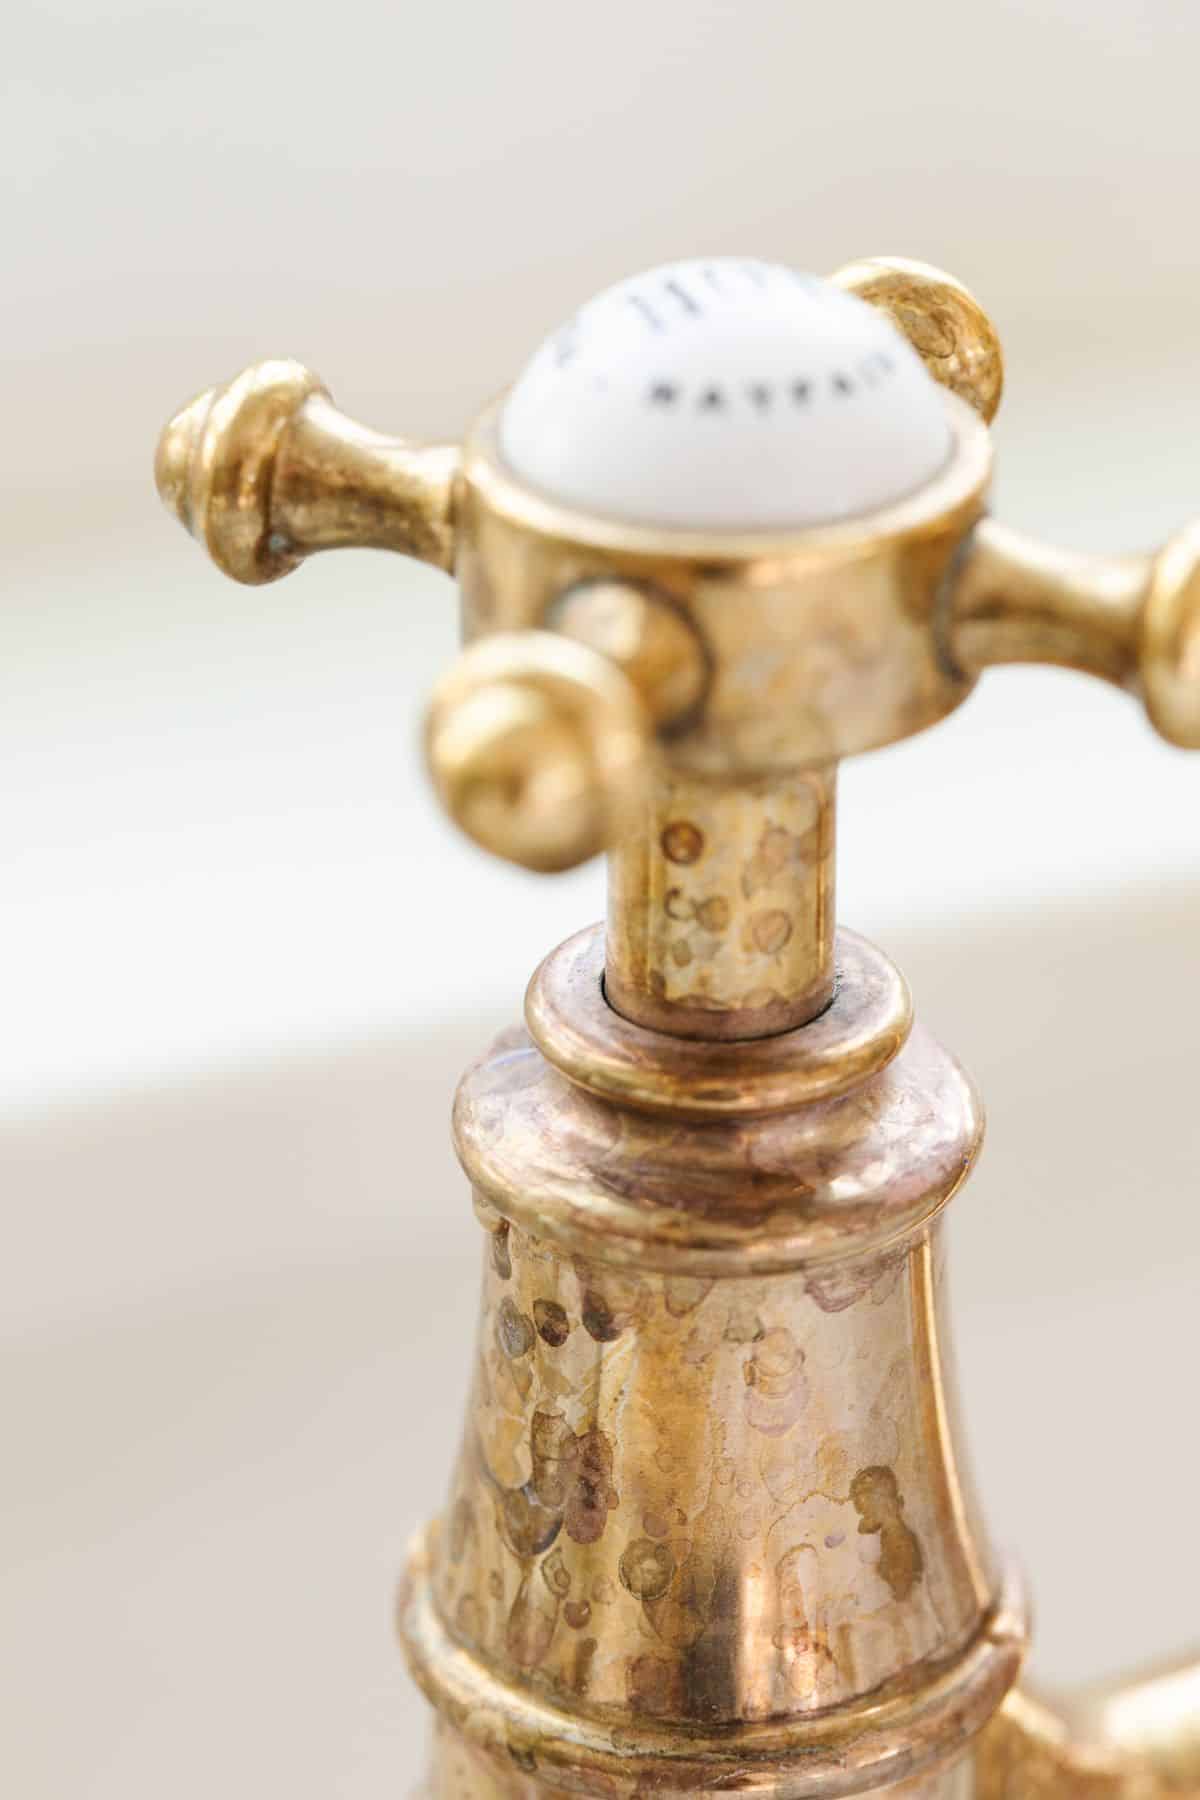 A brass kitchen faucet with some tarnish at the handle.